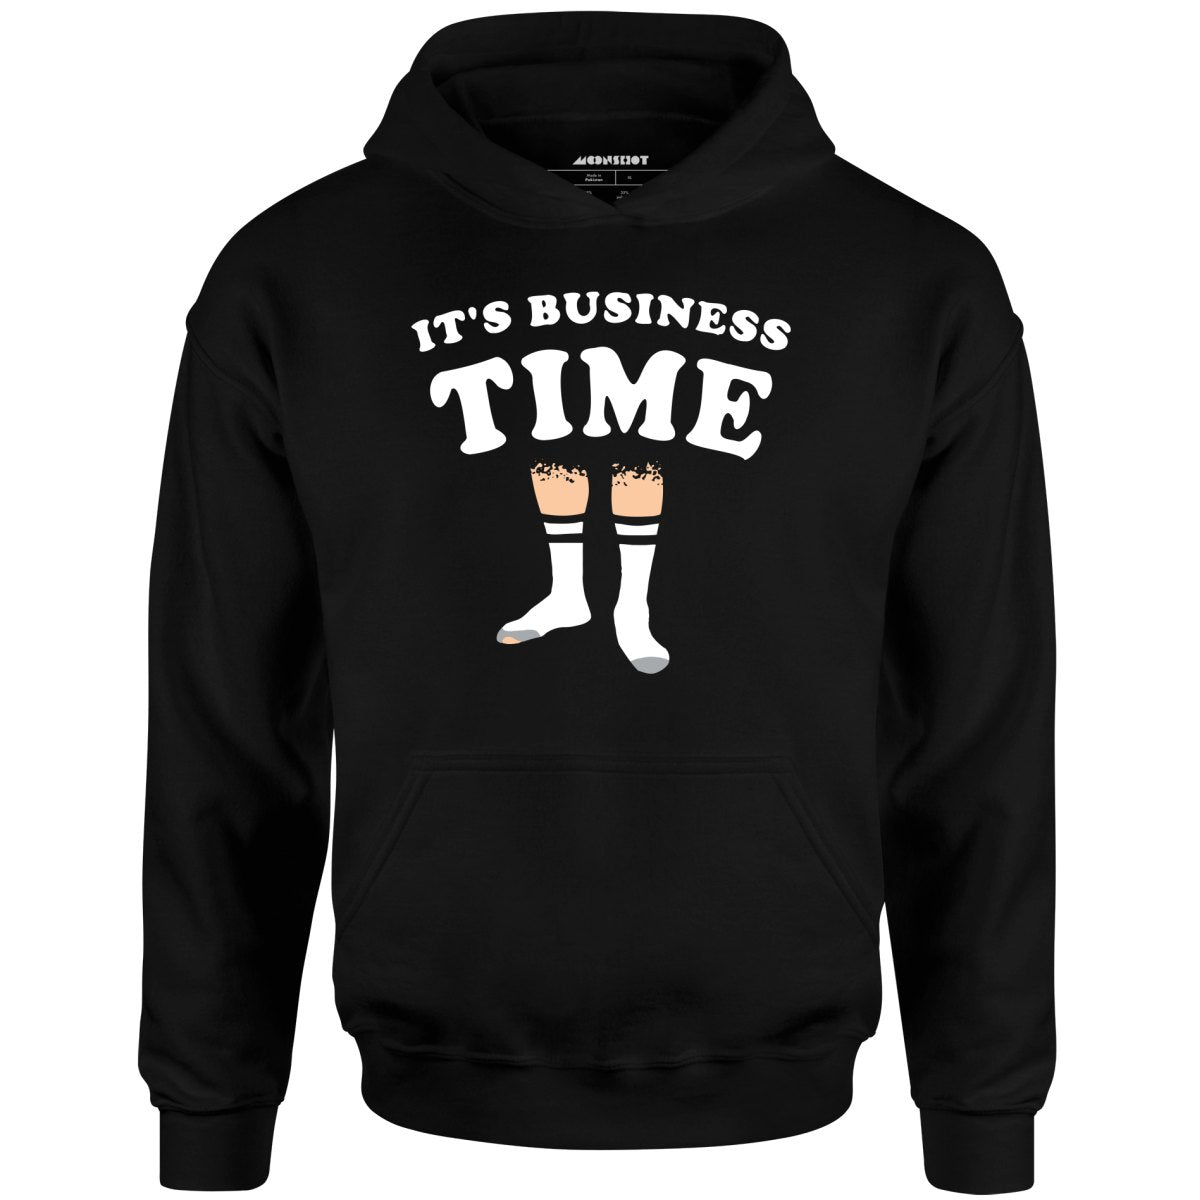 It's Business Time - Unisex Hoodie